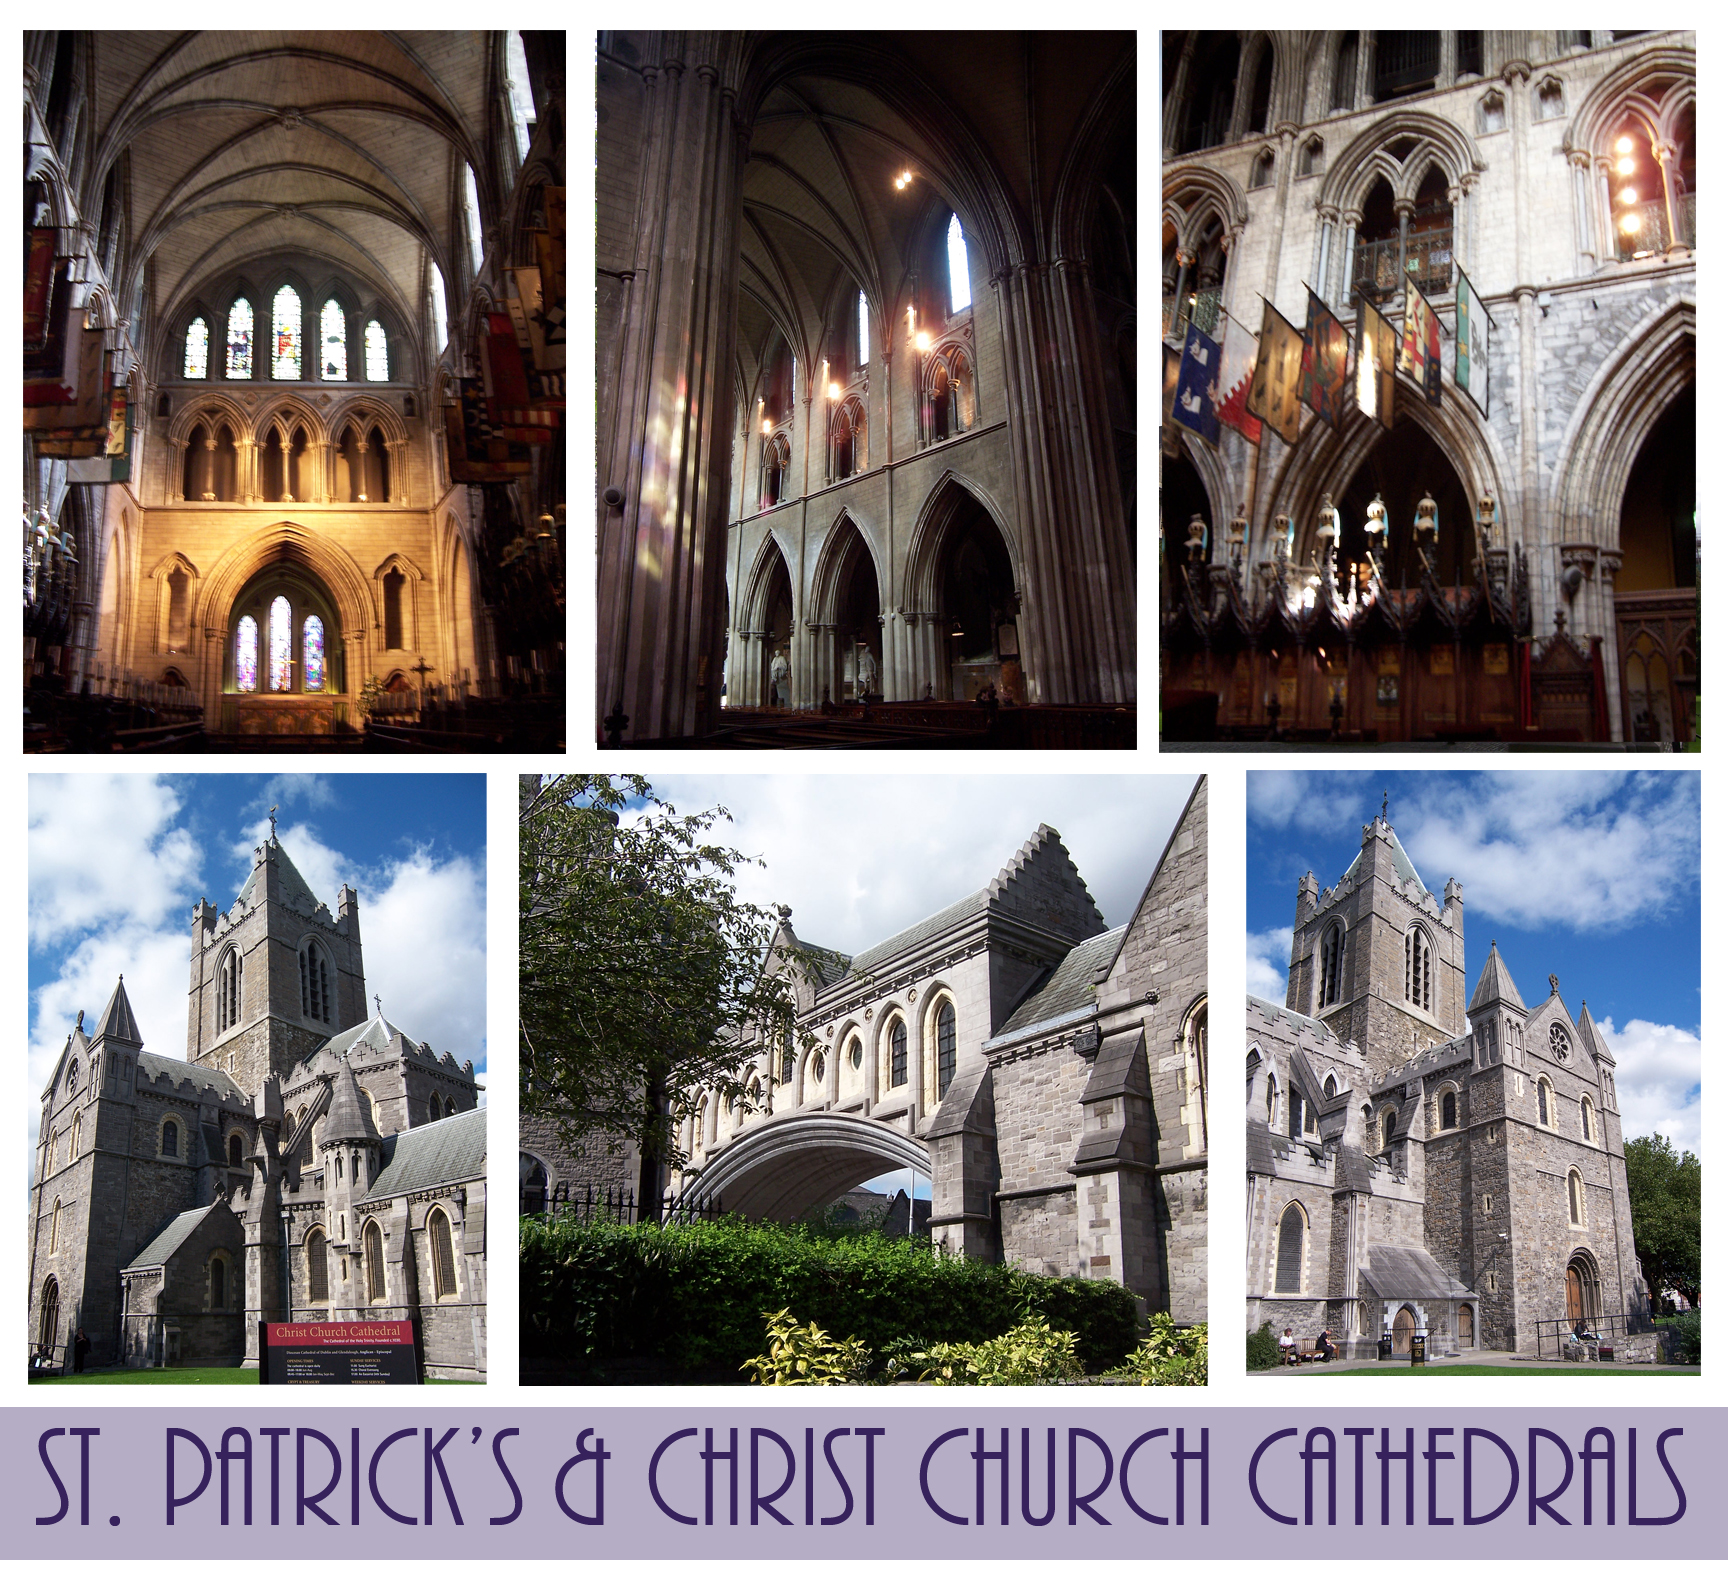 Time to Get Away - St Patricks and Christ Church Cathedrals